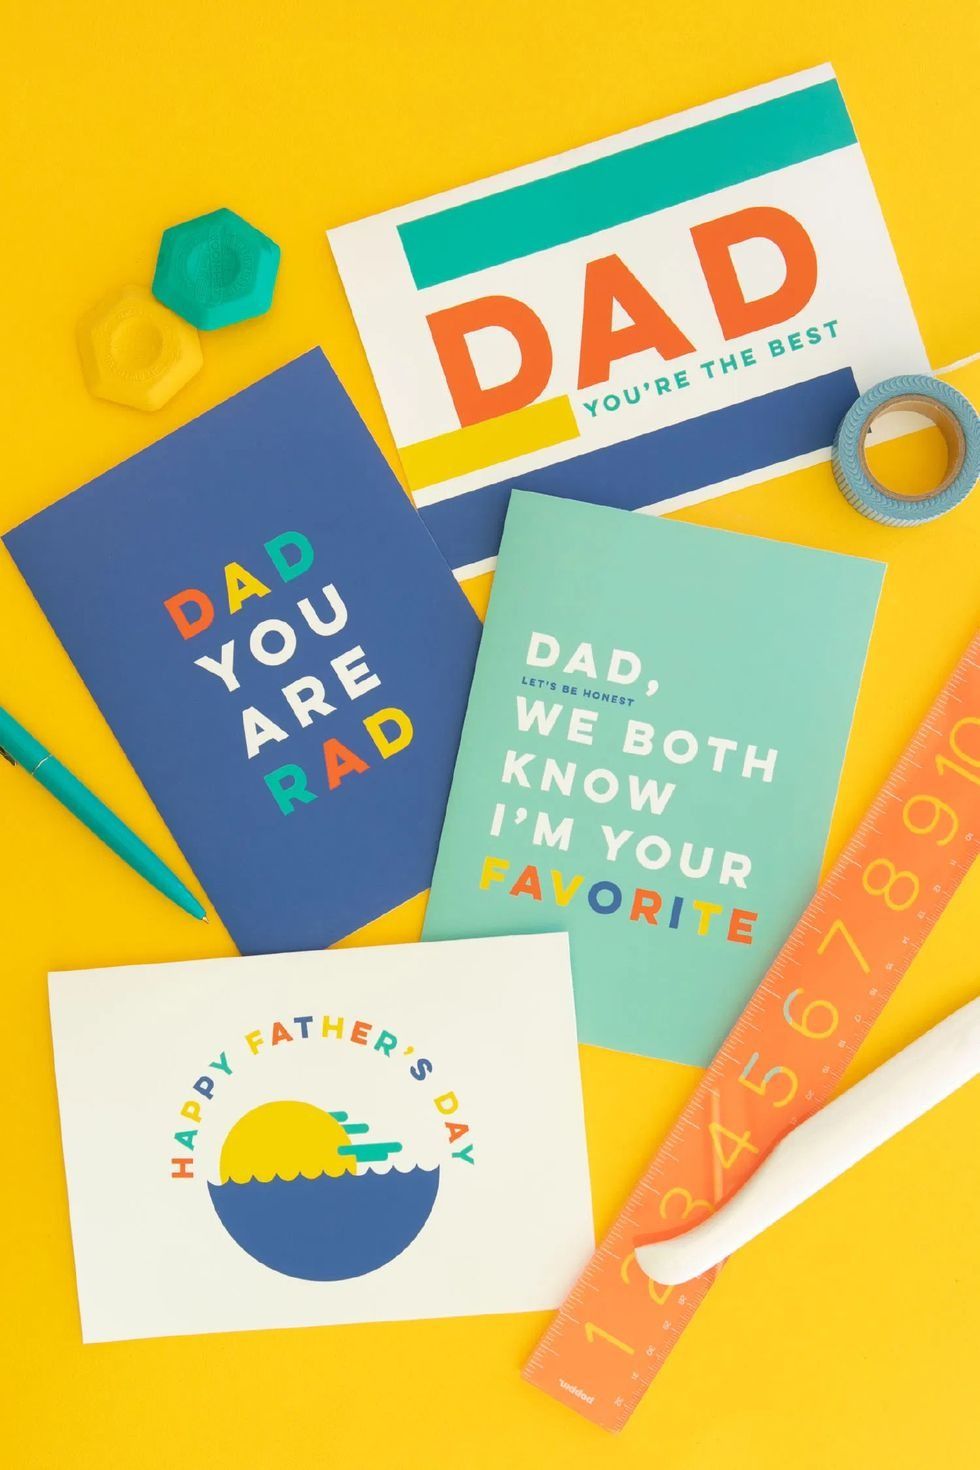 Happy Father's Day (baseball) Circle Tags